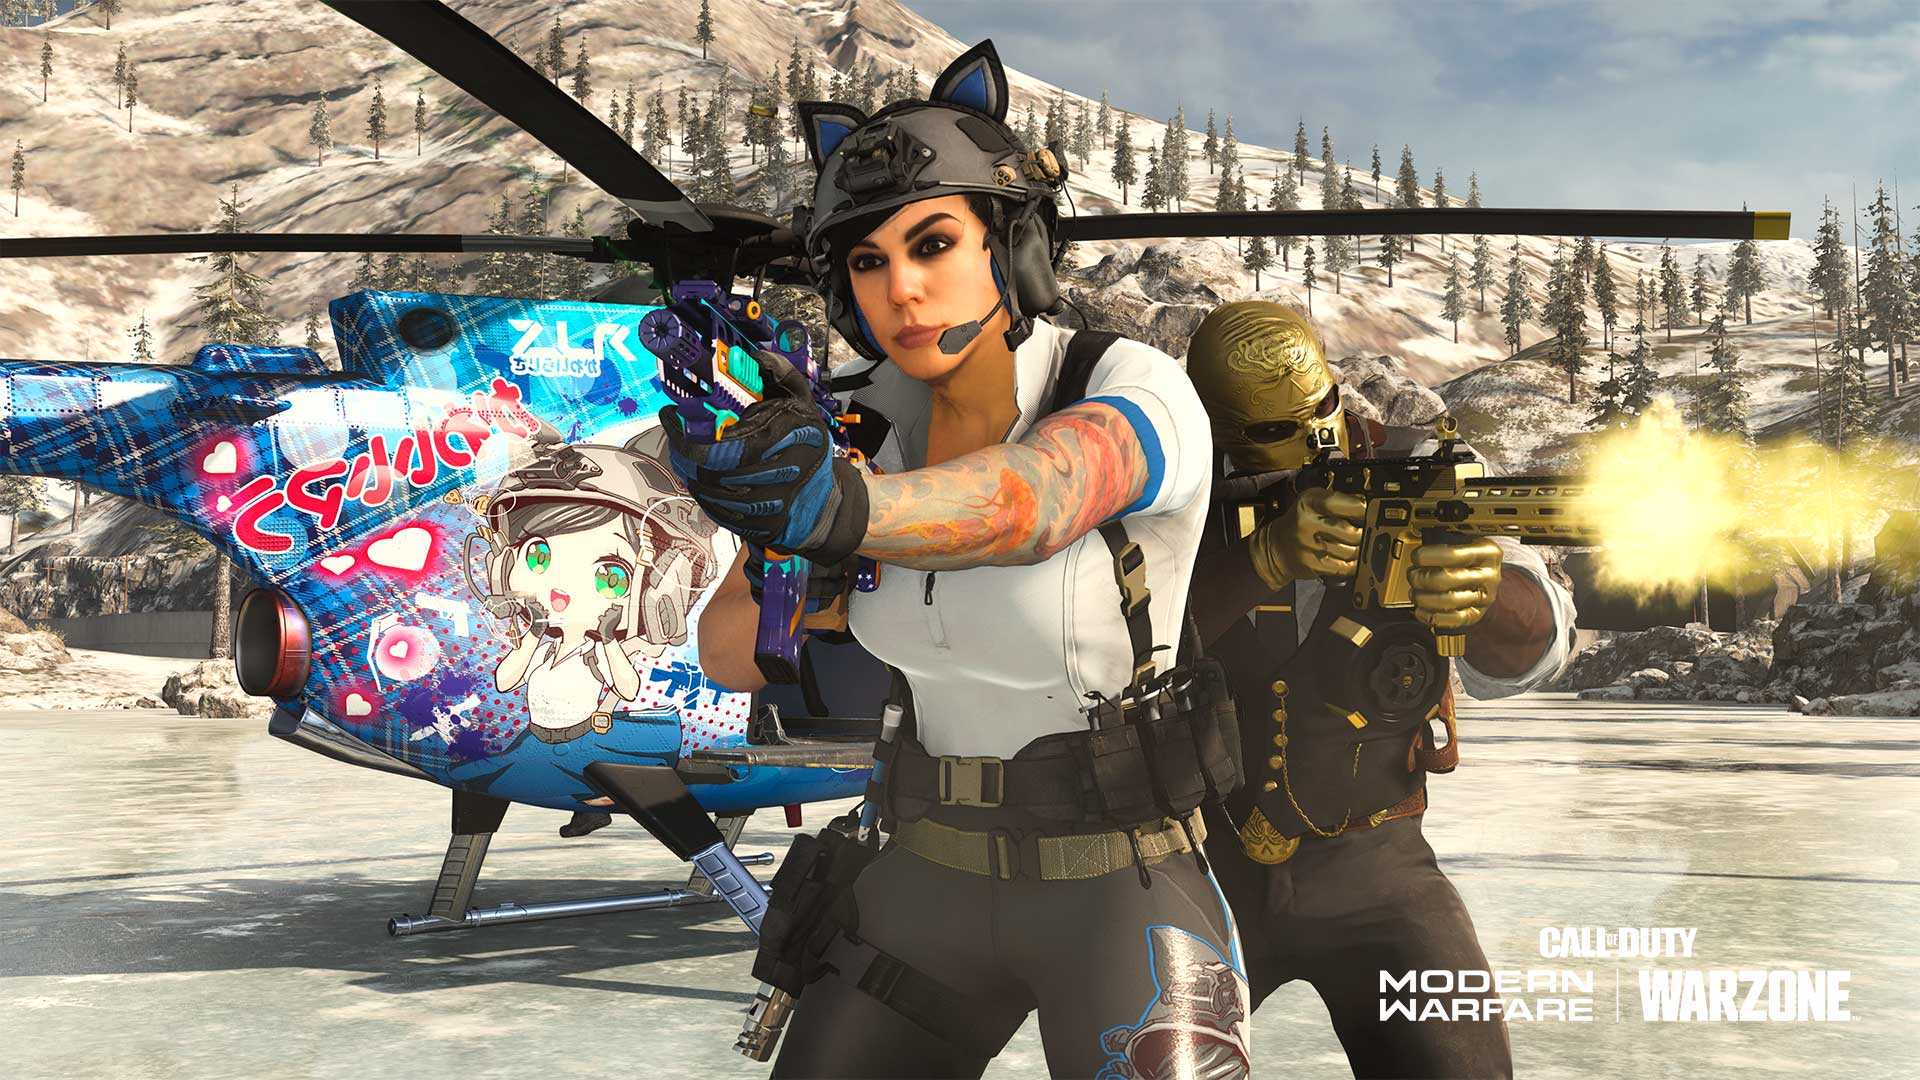 Download Mara Notice Meow Codm - Modernwarzone On Twitter The ...